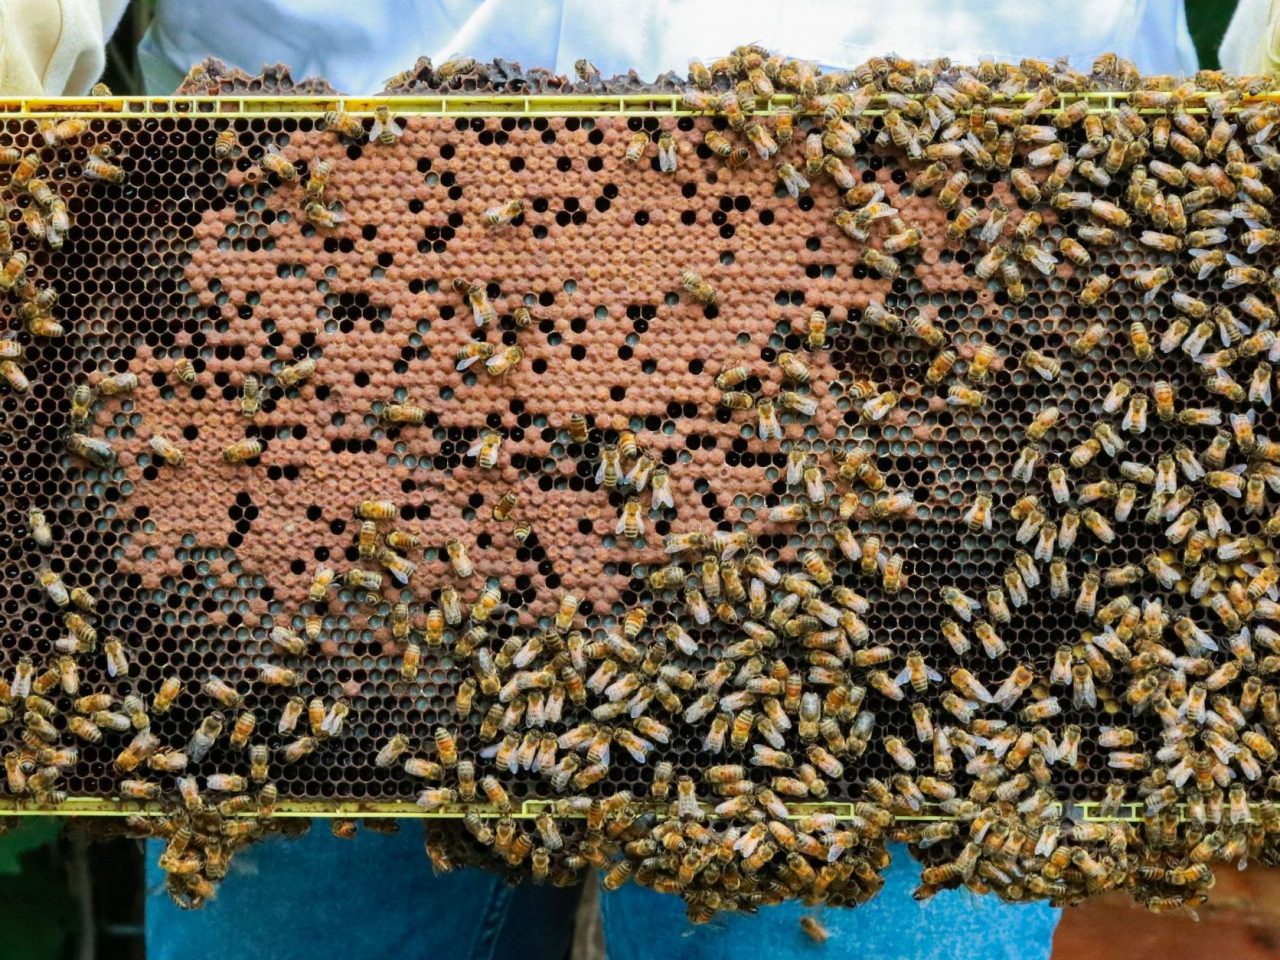 this is a photo of a beehive